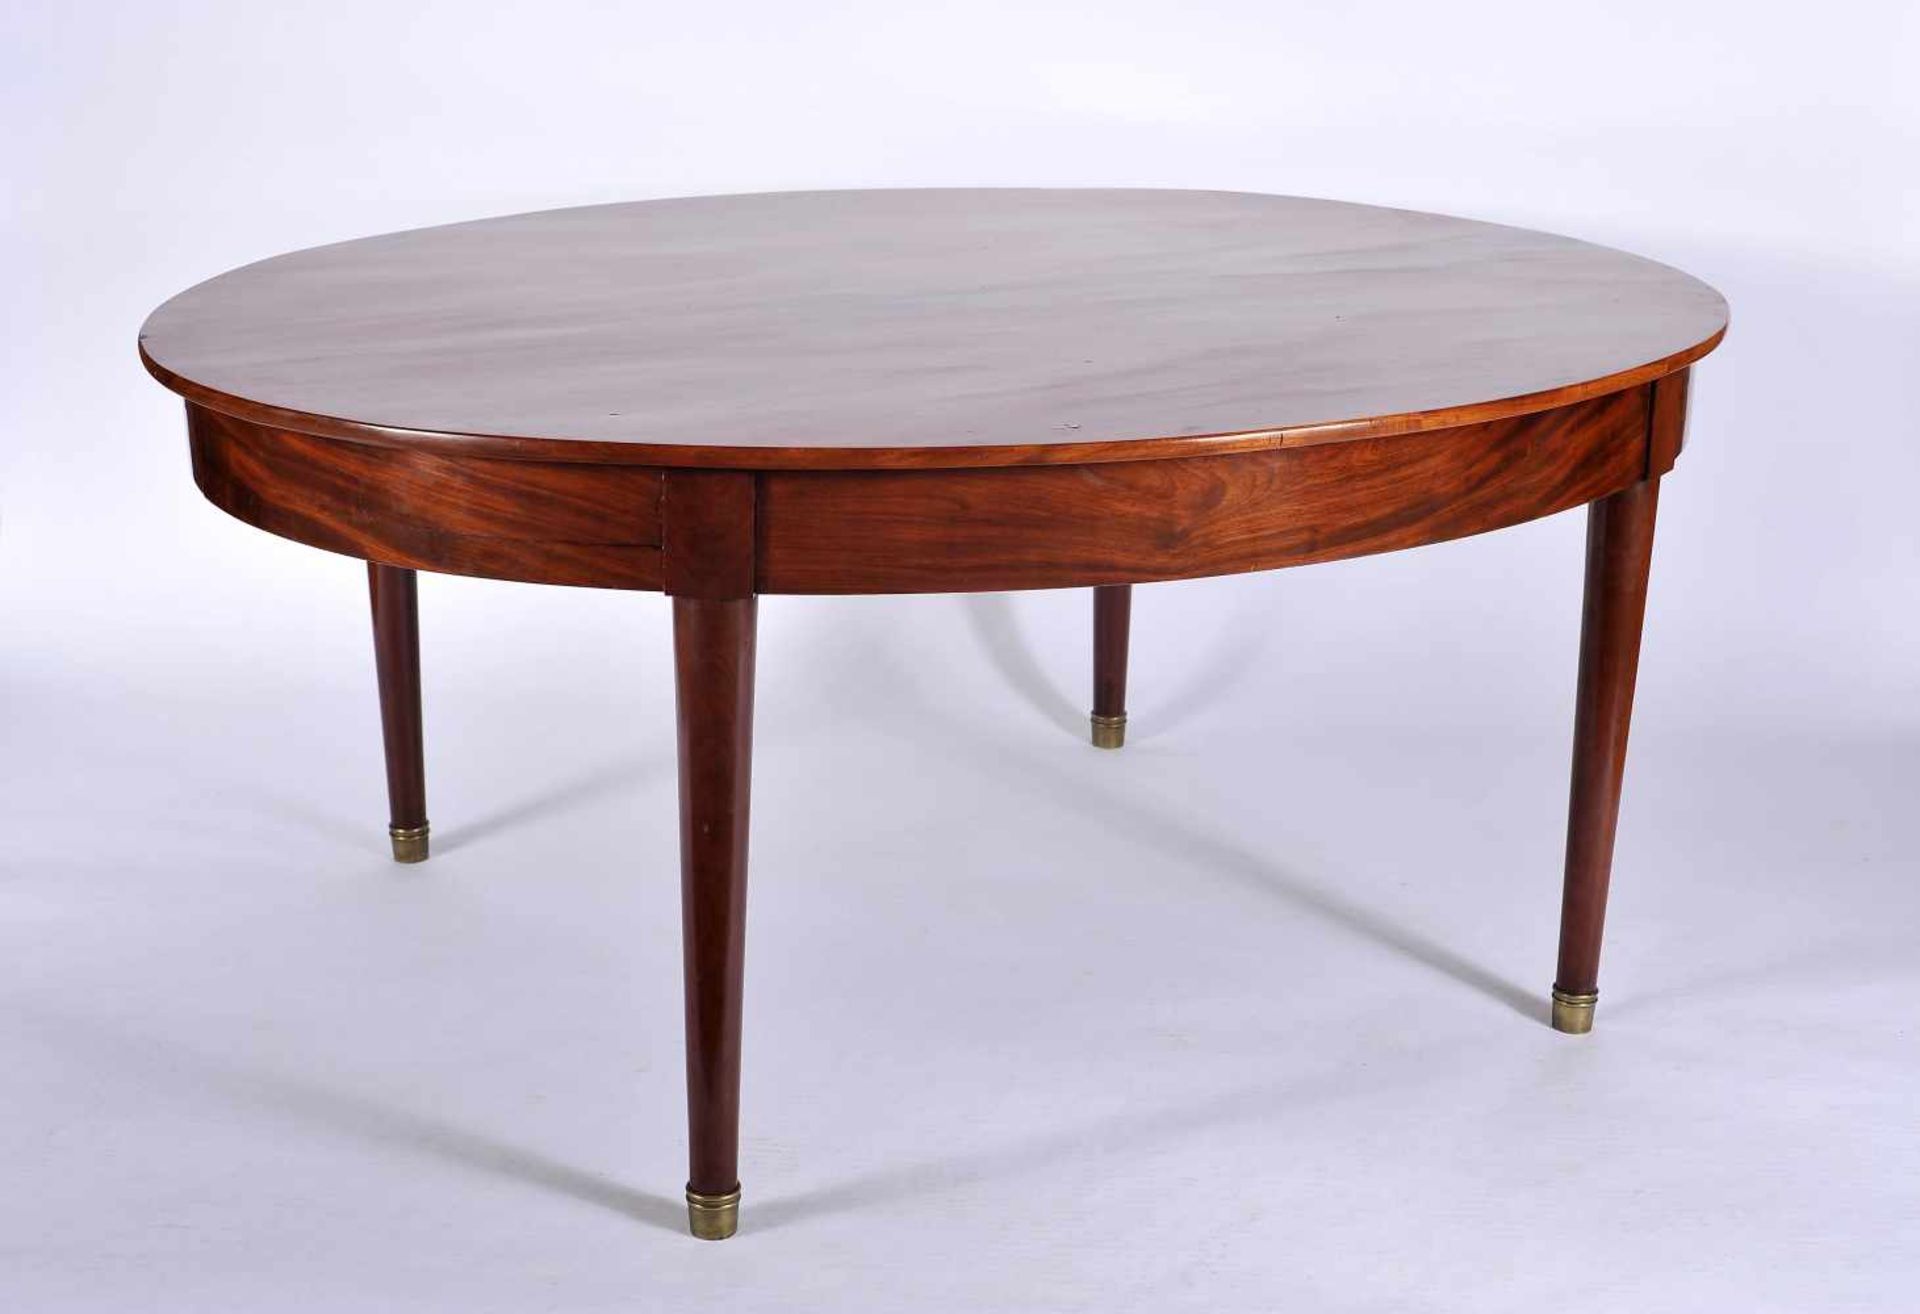 An Oval Table, mahogany, legs with bronze caps, European, 19th C., small restoration, Dim. - 72 x